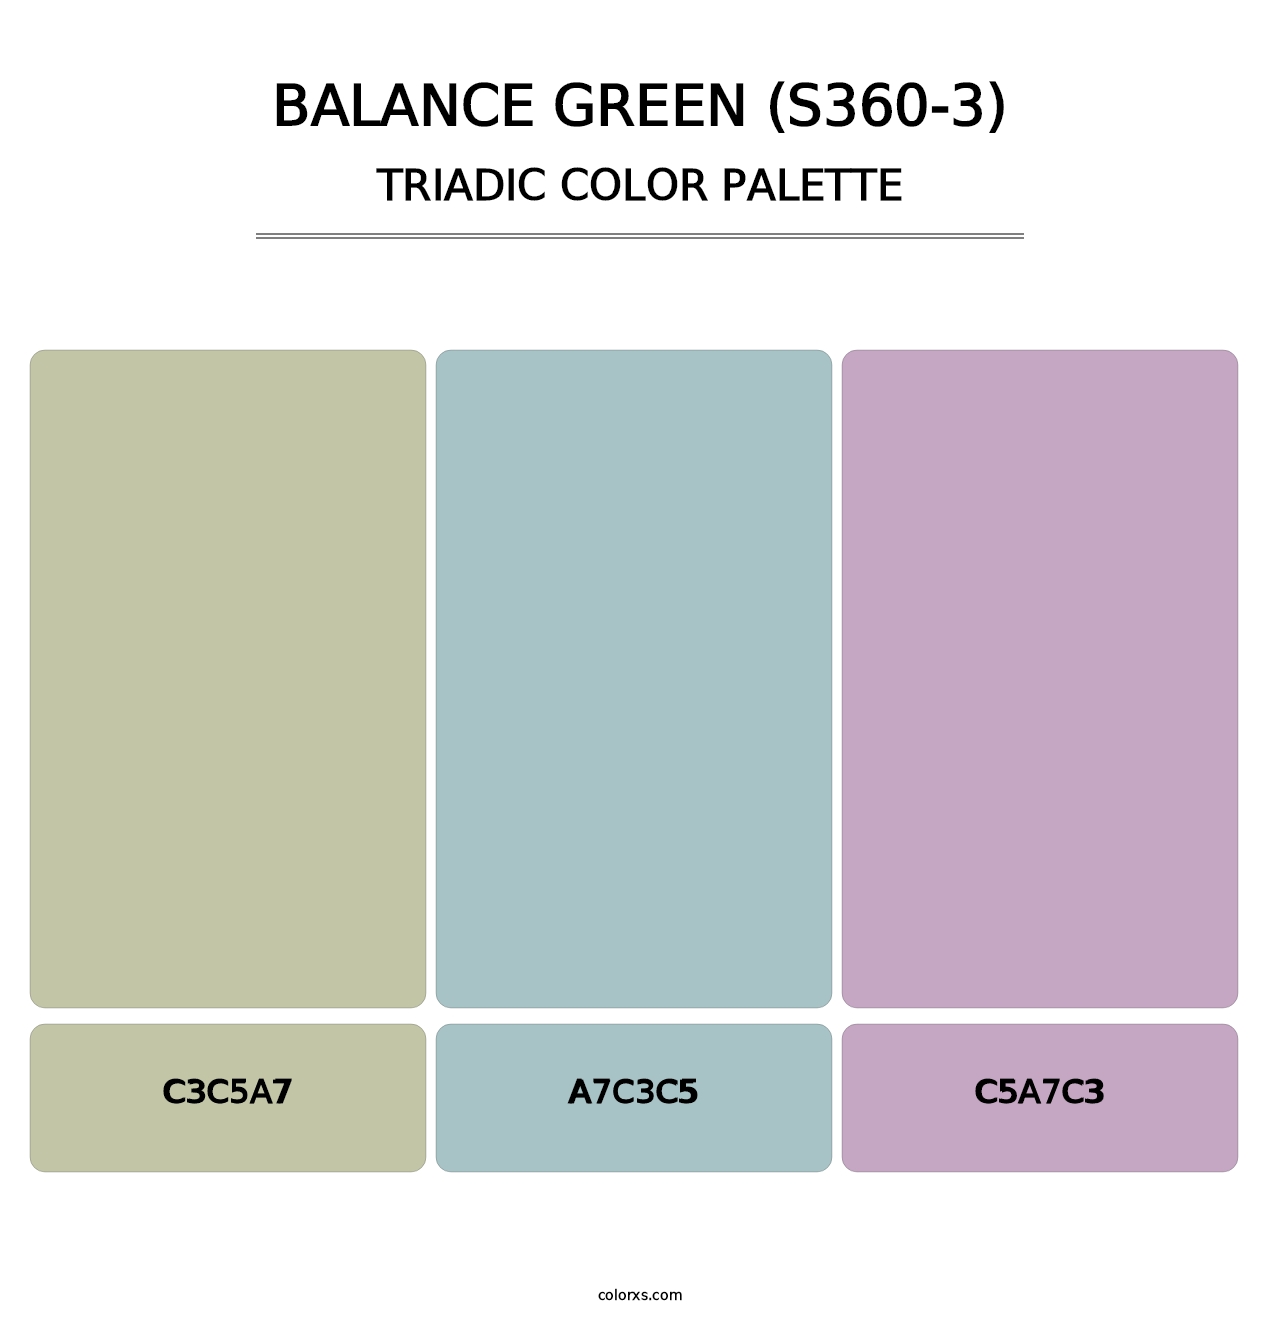 Balance Green (S360-3) - Triadic Color Palette